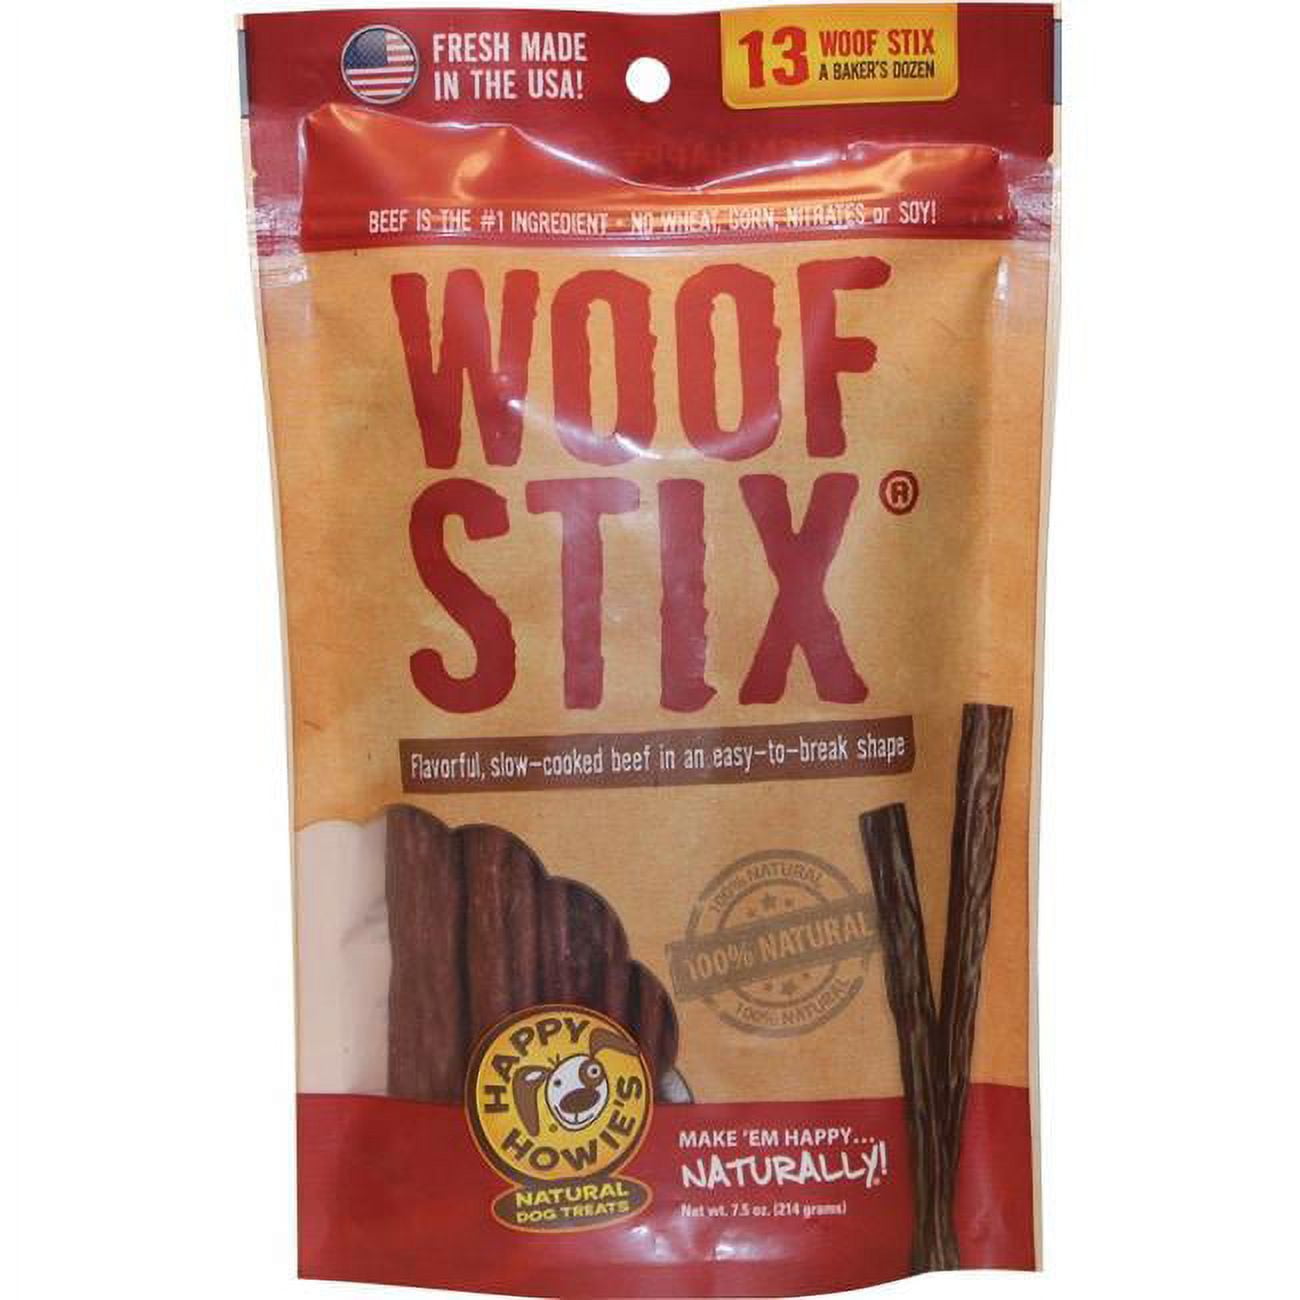 42042 Bx 6 In. Beef Woof Stix Bakers - 13 Per Pack, Pack Of 6